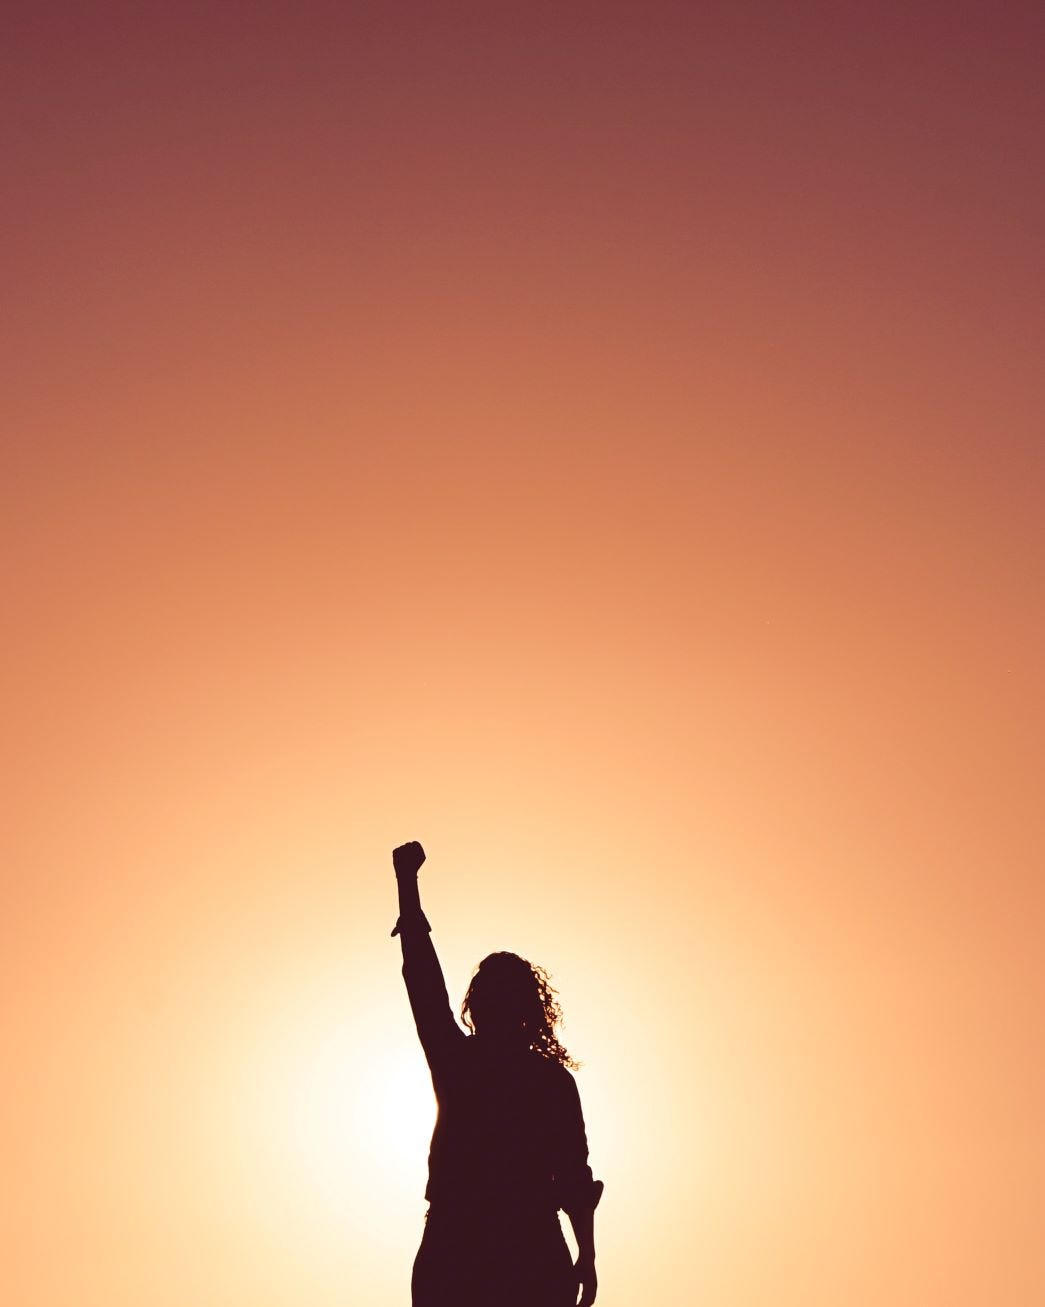 A woman is silhouetted against an orange sky. She stands alone, one arm raised above her head, her hand clenched into a fist. 